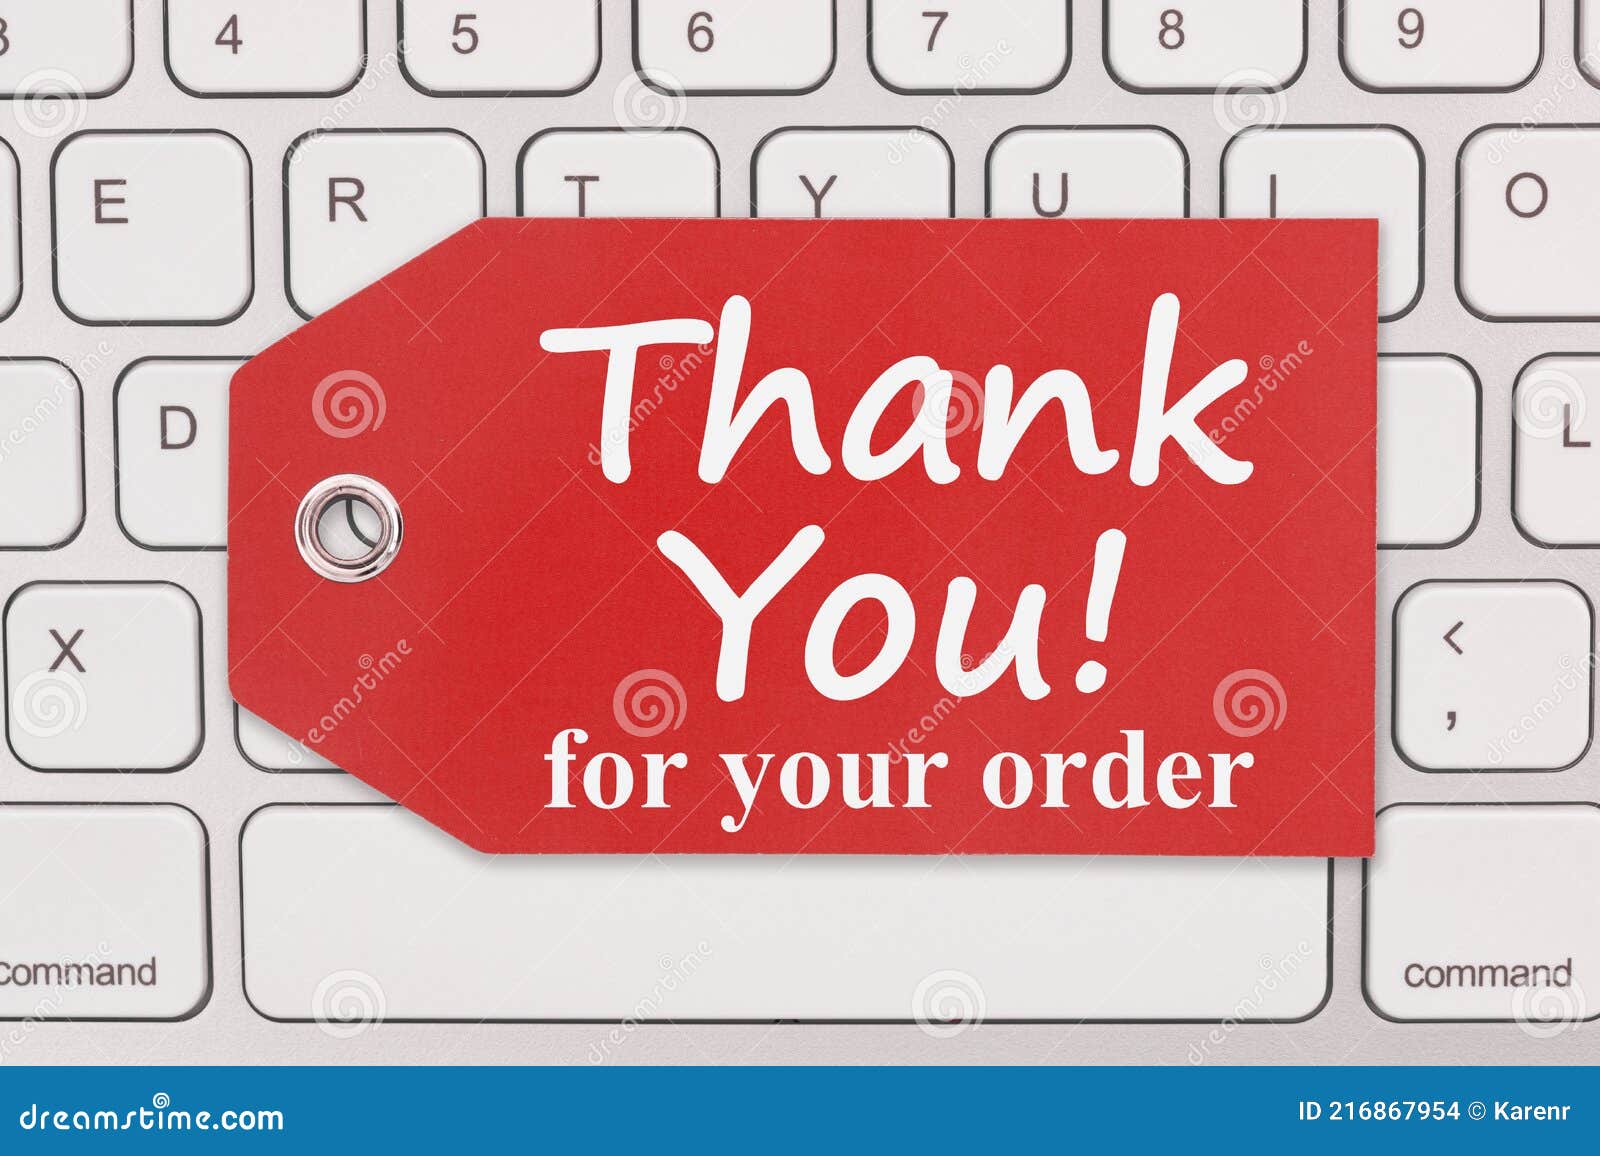 Thank You Your Order Photos Free Royalty Free Stock Photos From Dreamstime